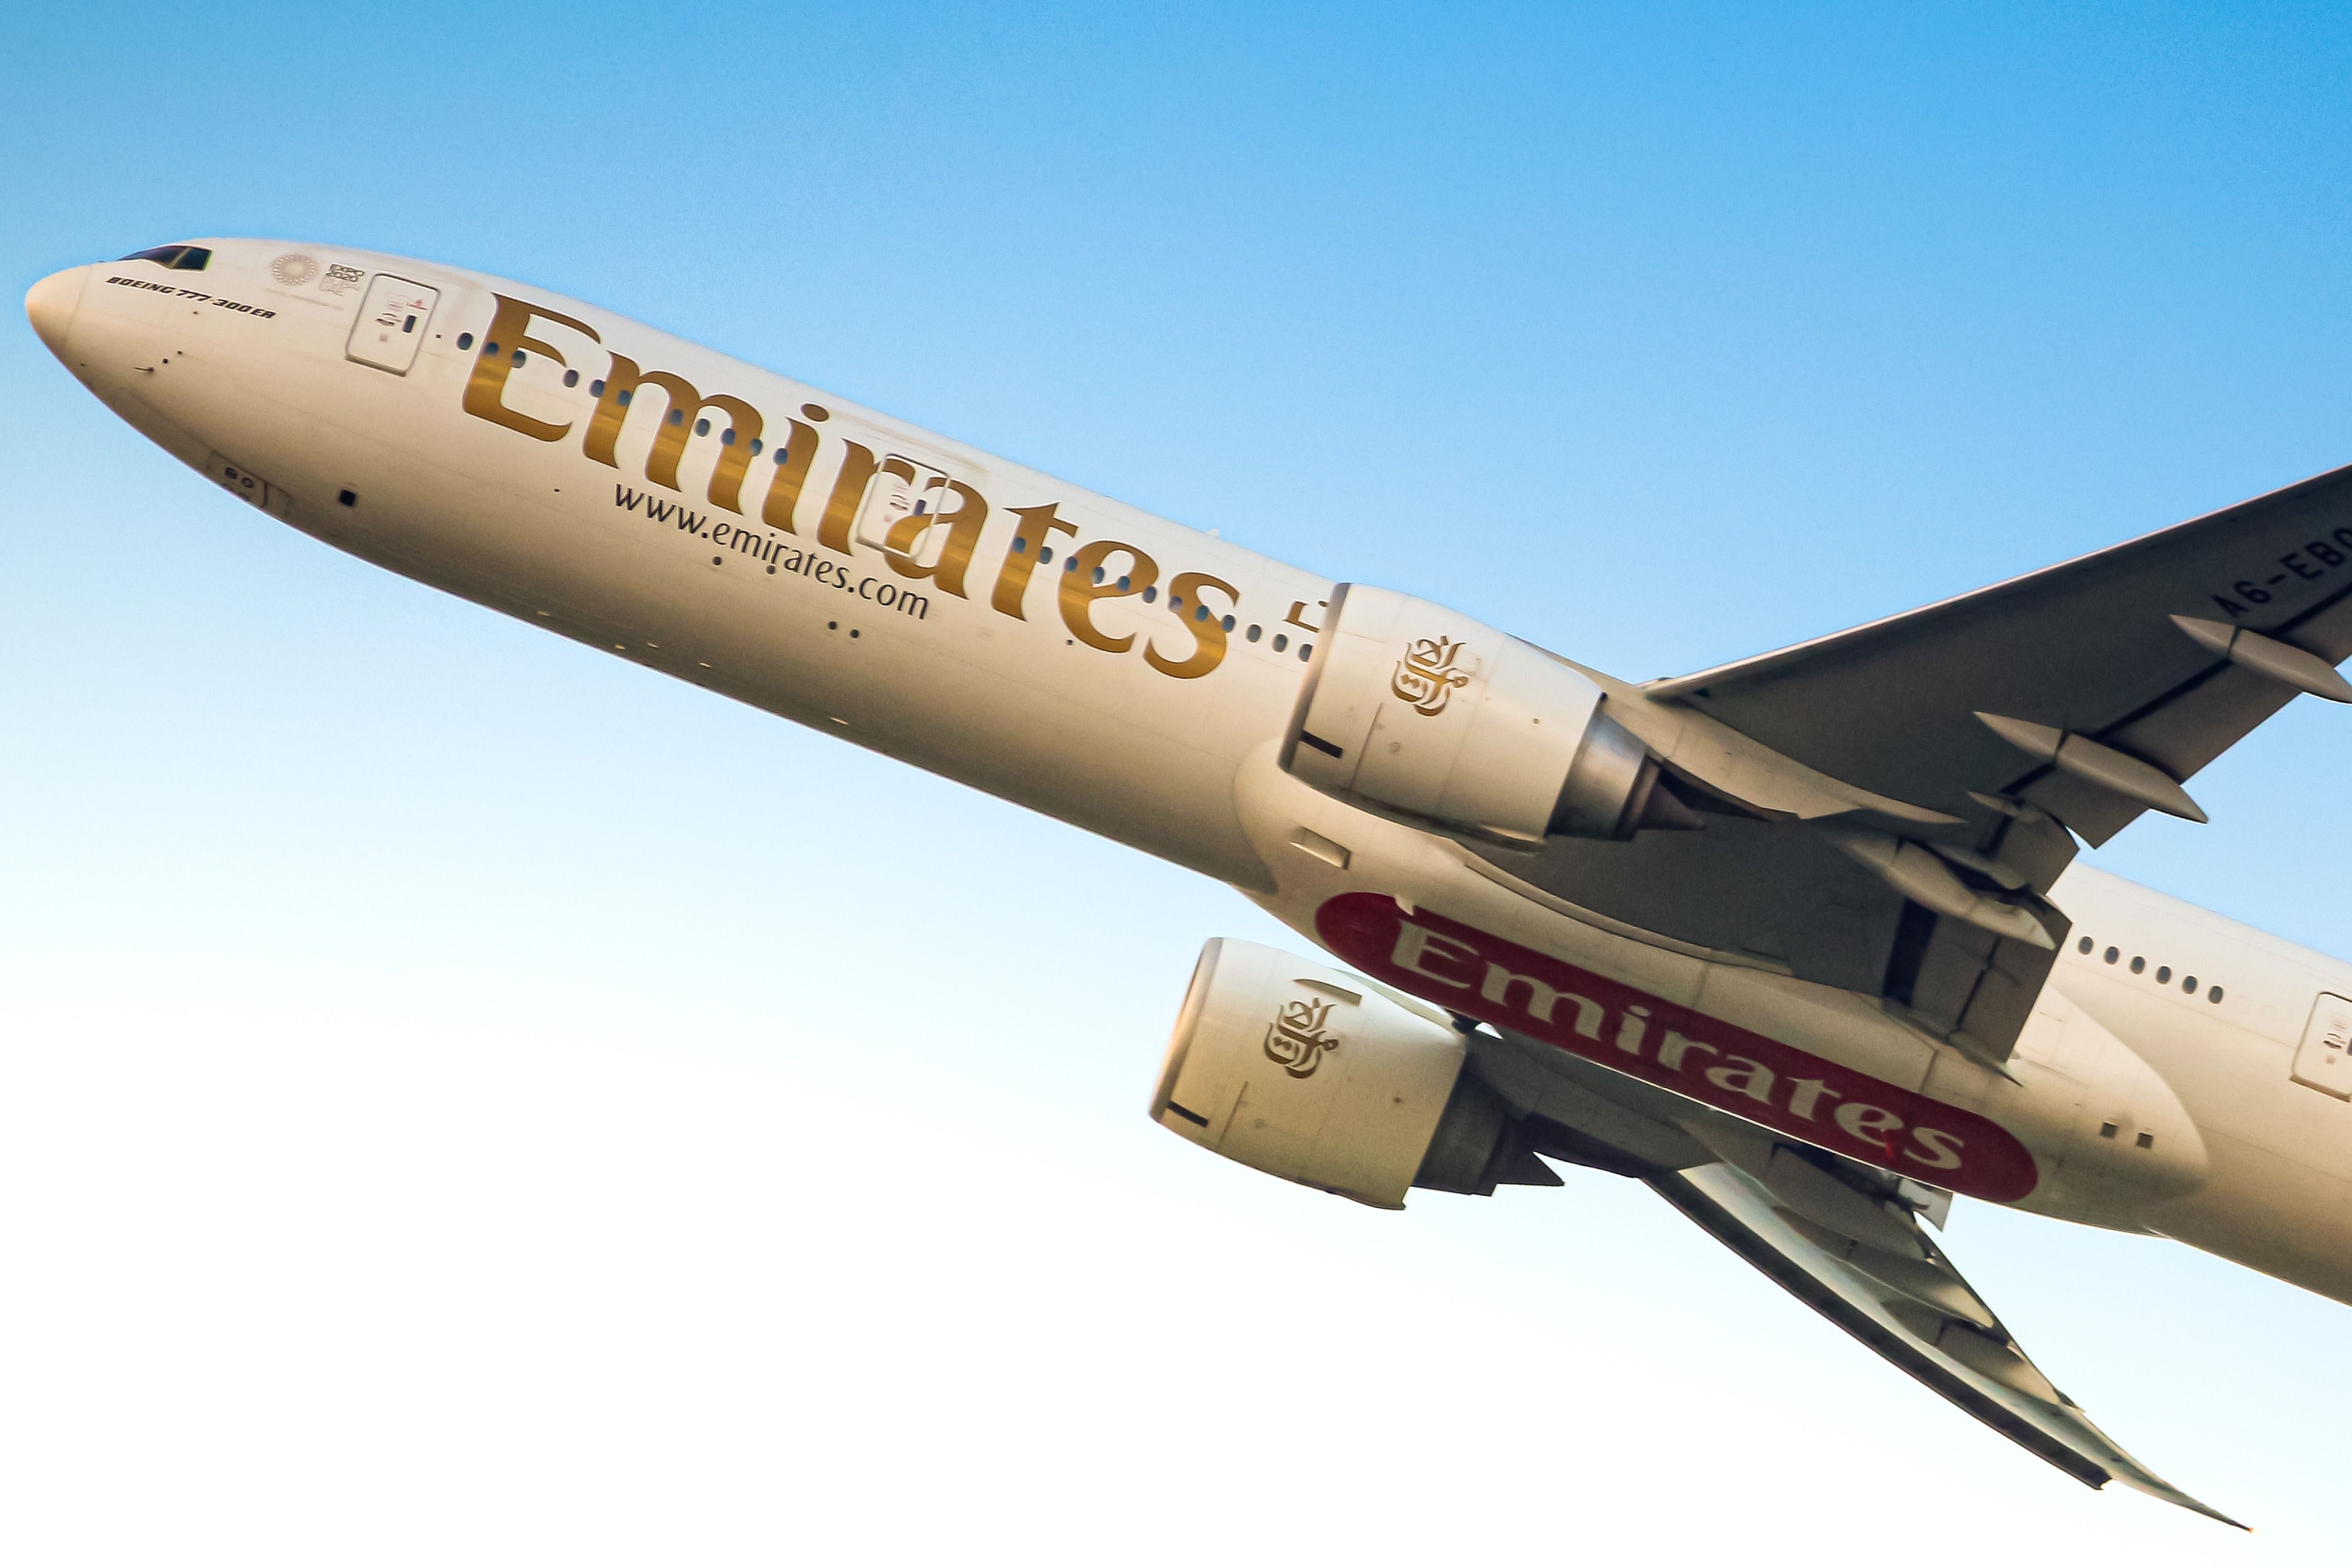 An Emirates Boeing 777-300ER flying in the sky.